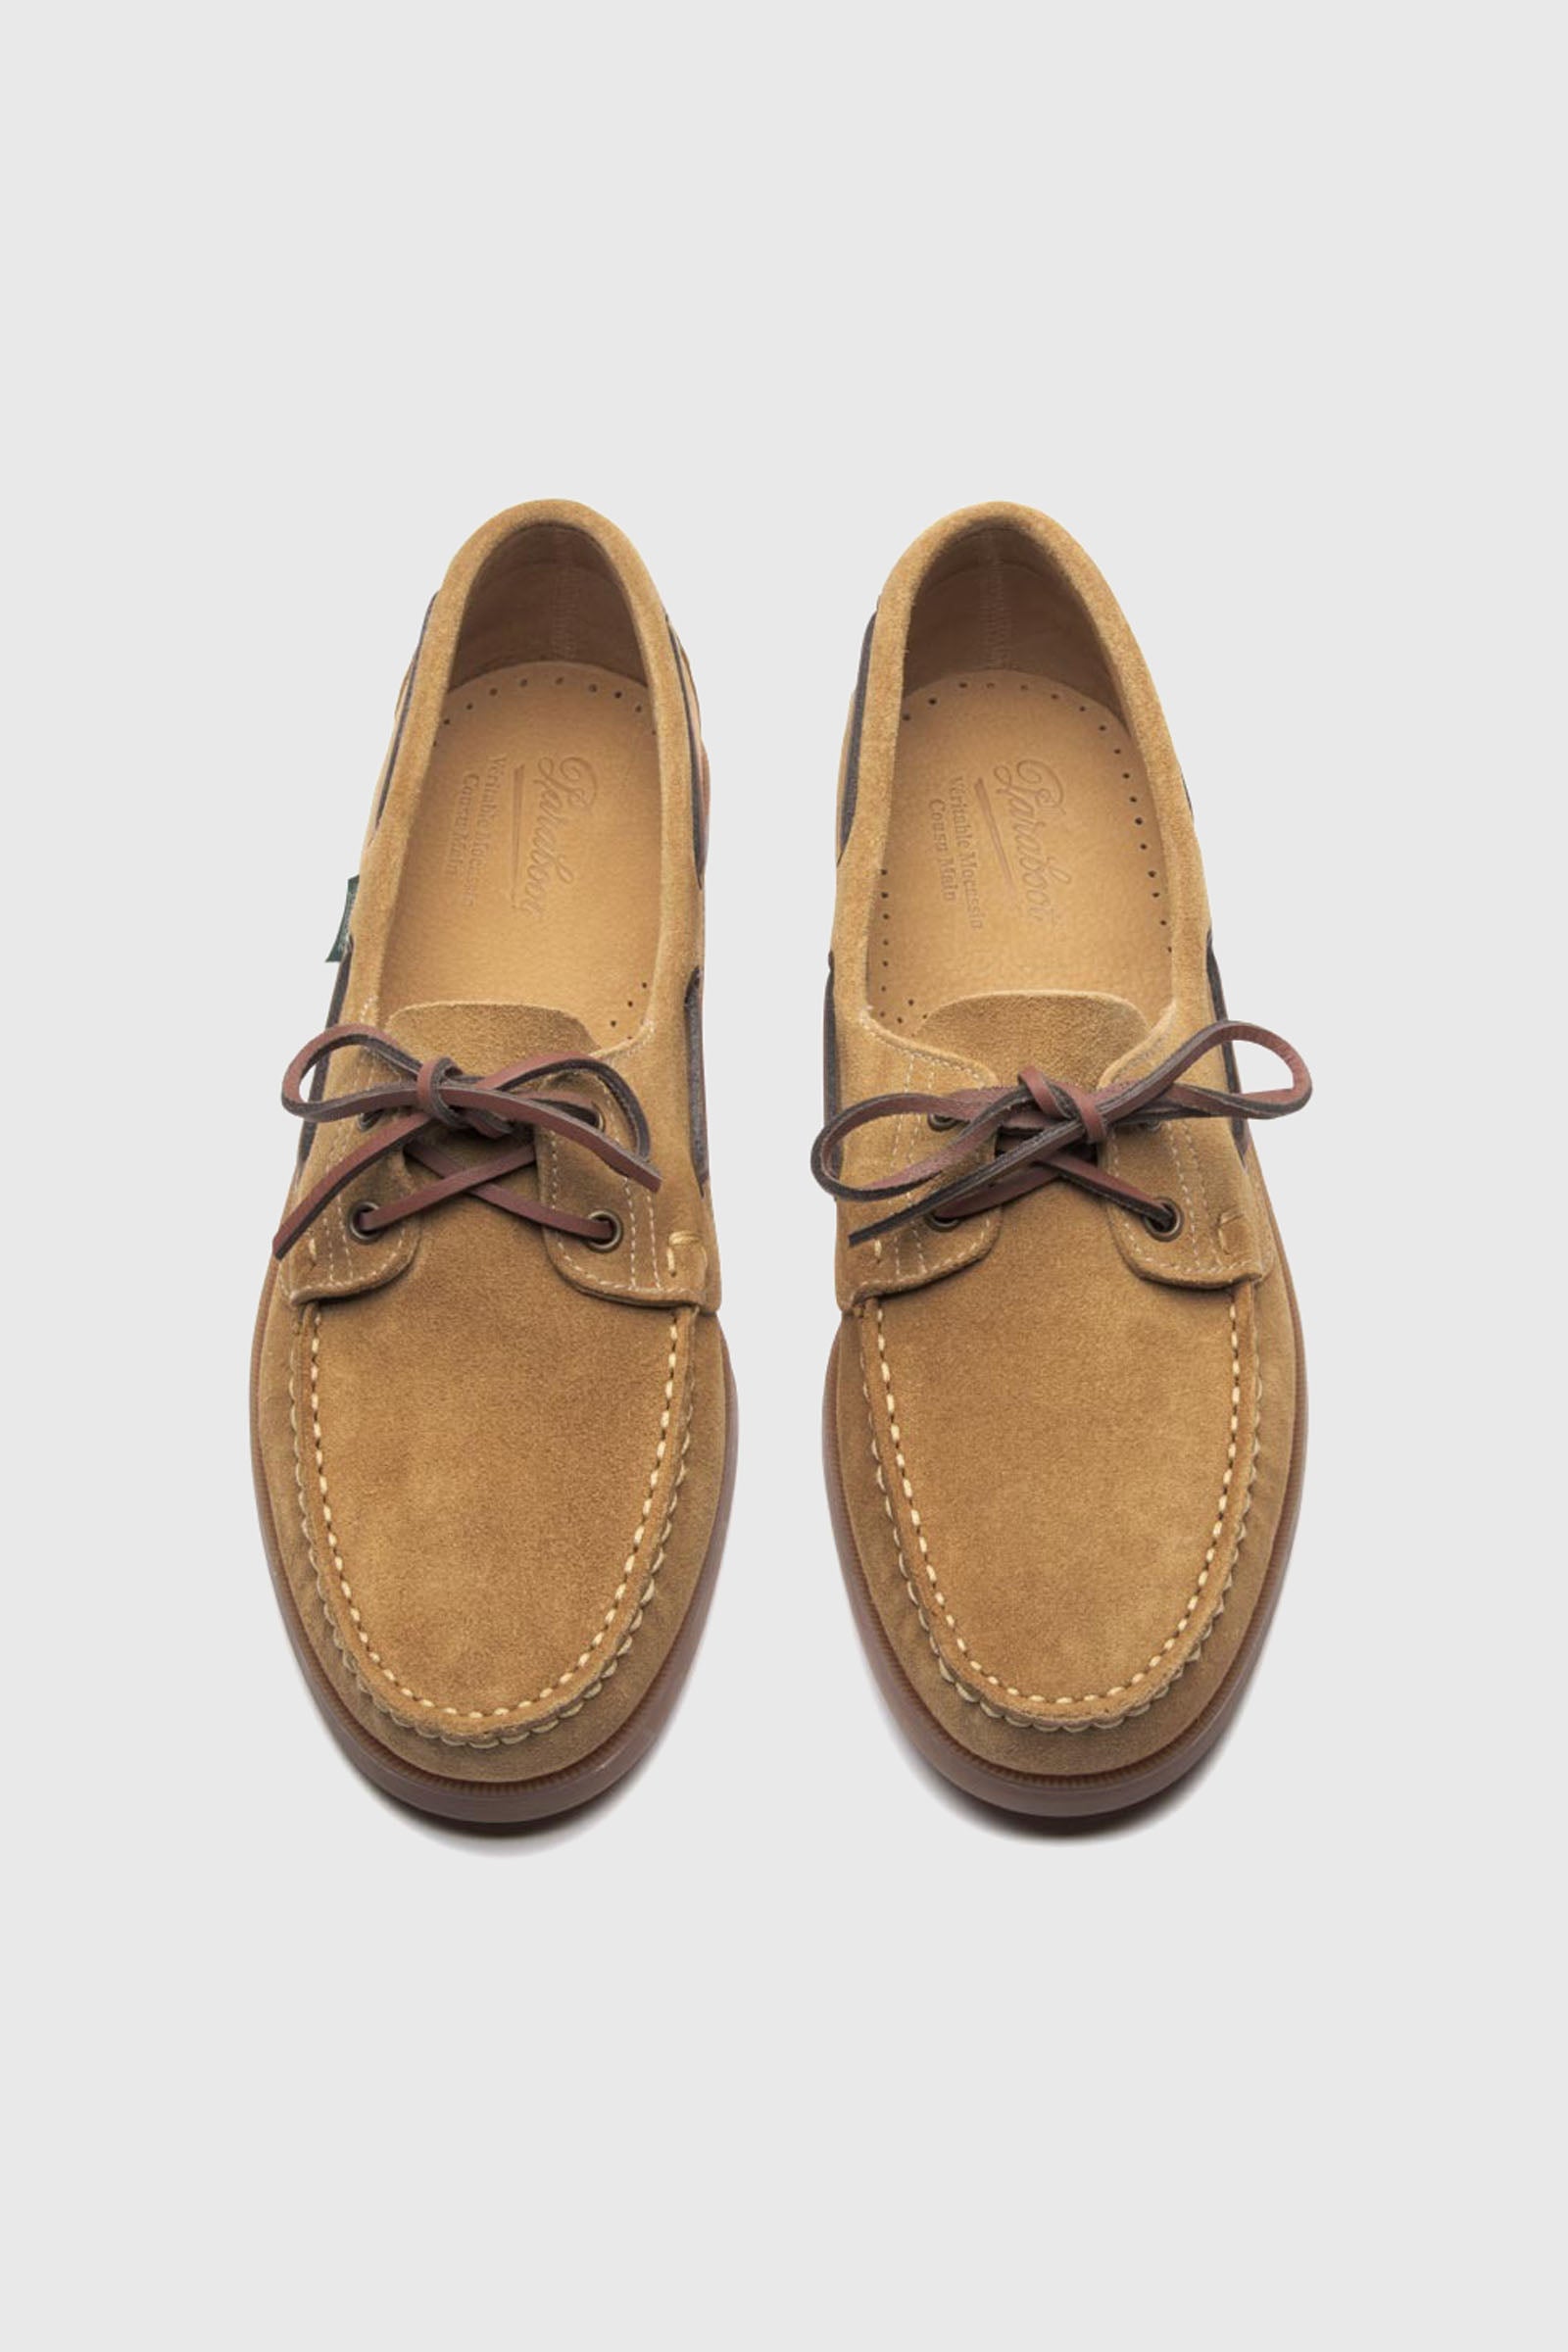 Paraboot Loafer Barth Honey Leather - 5